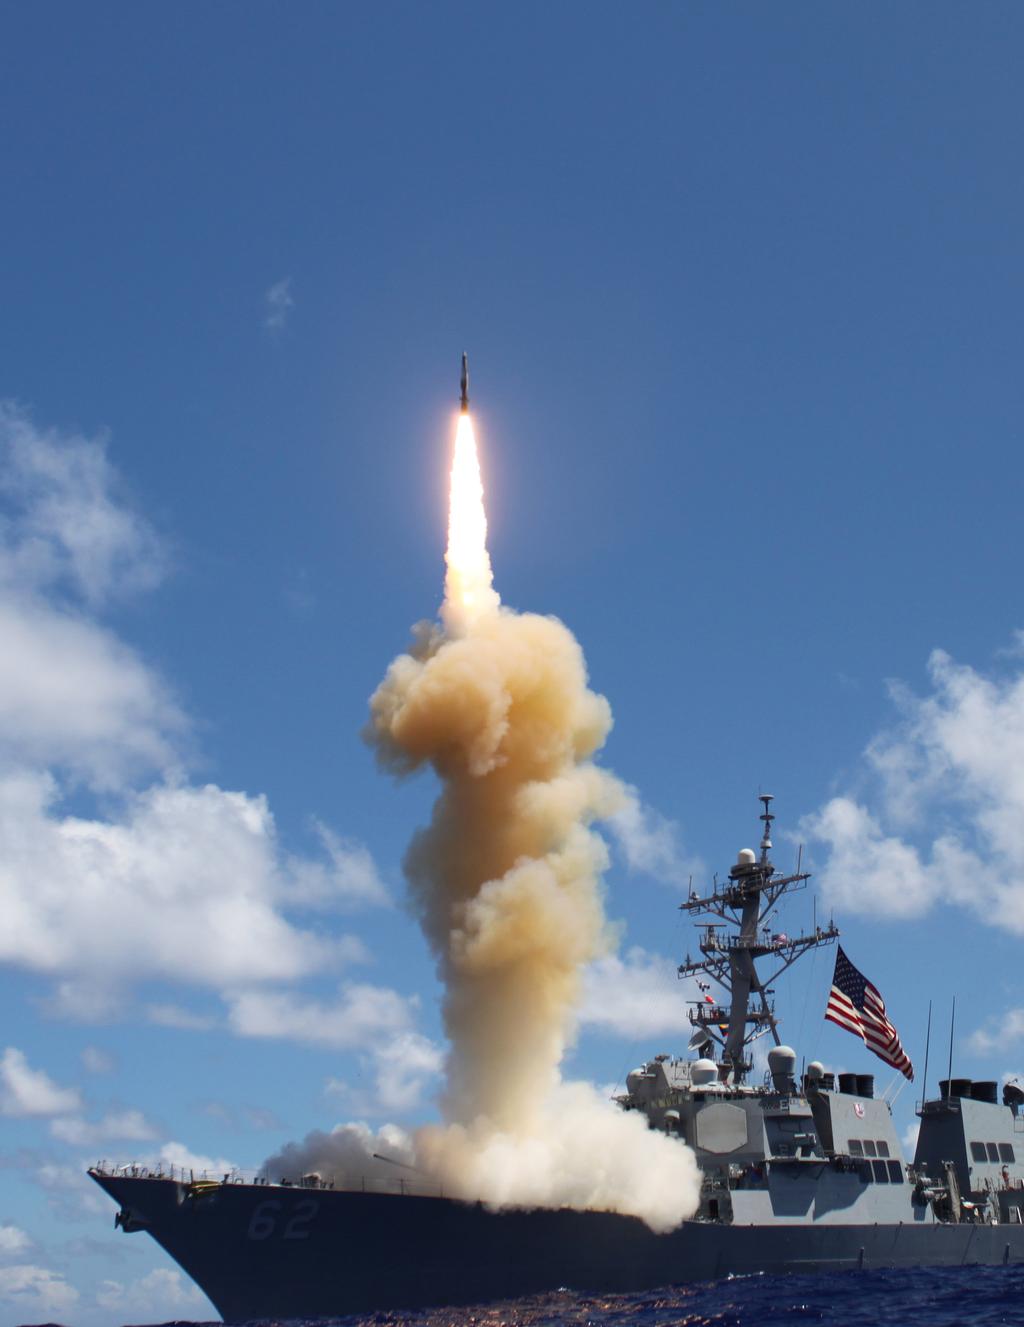 Missile Defense and American Security The American Foreign Policy Council (AFPC) has tracked offensive missile threats and advocated for a strong missile defense for well over a decade.